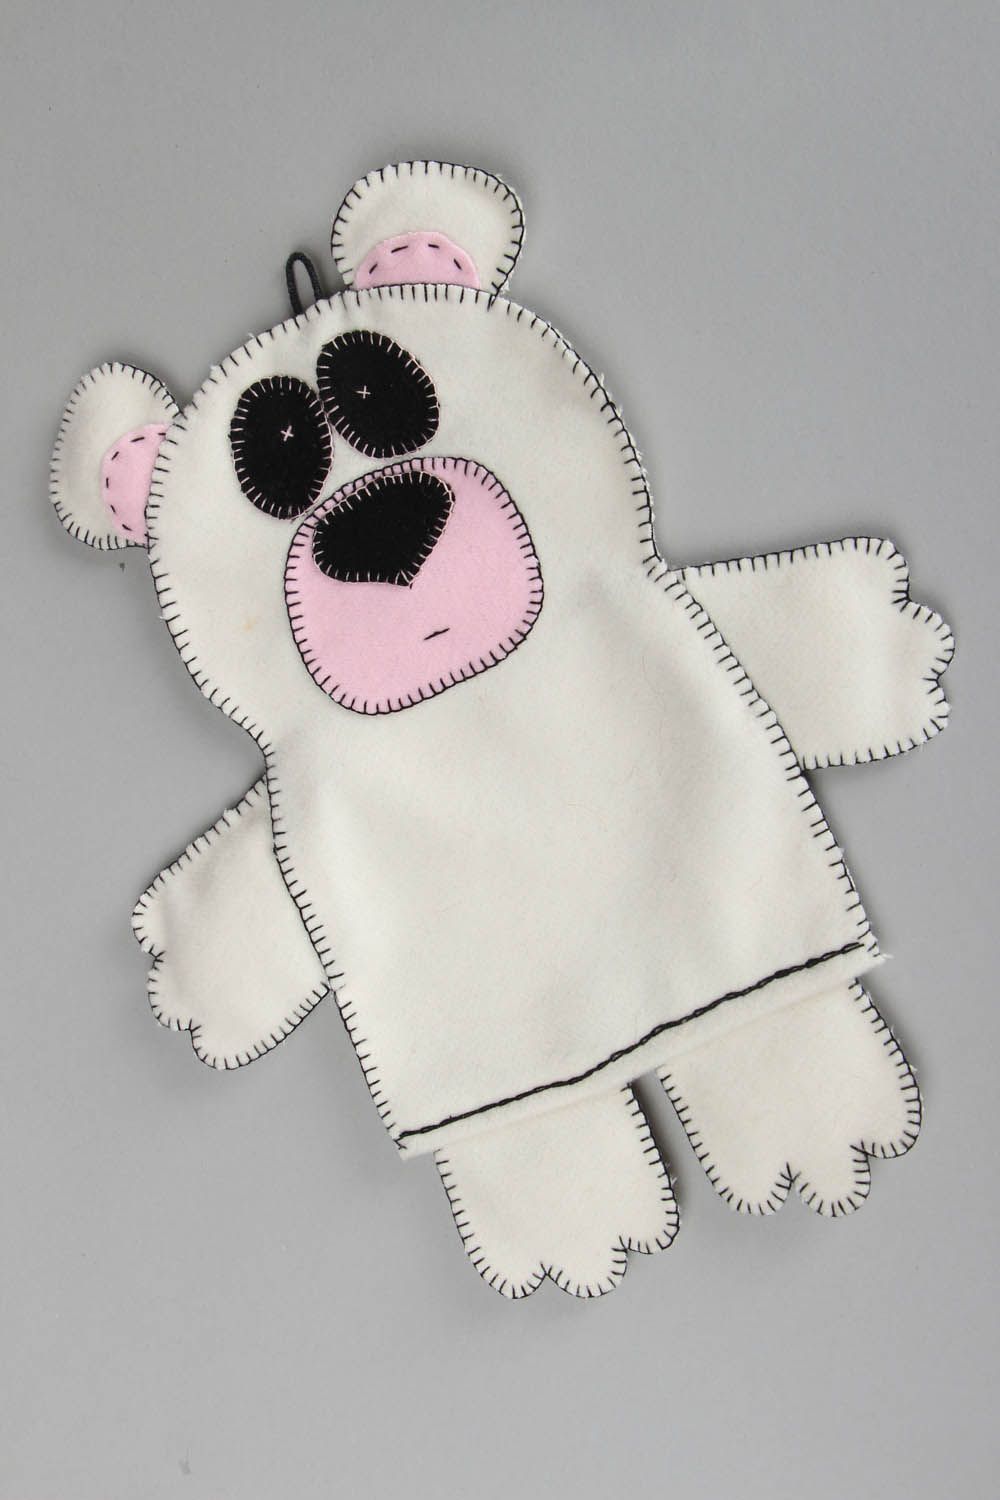 Oven glove in the shape of a bear photo 1